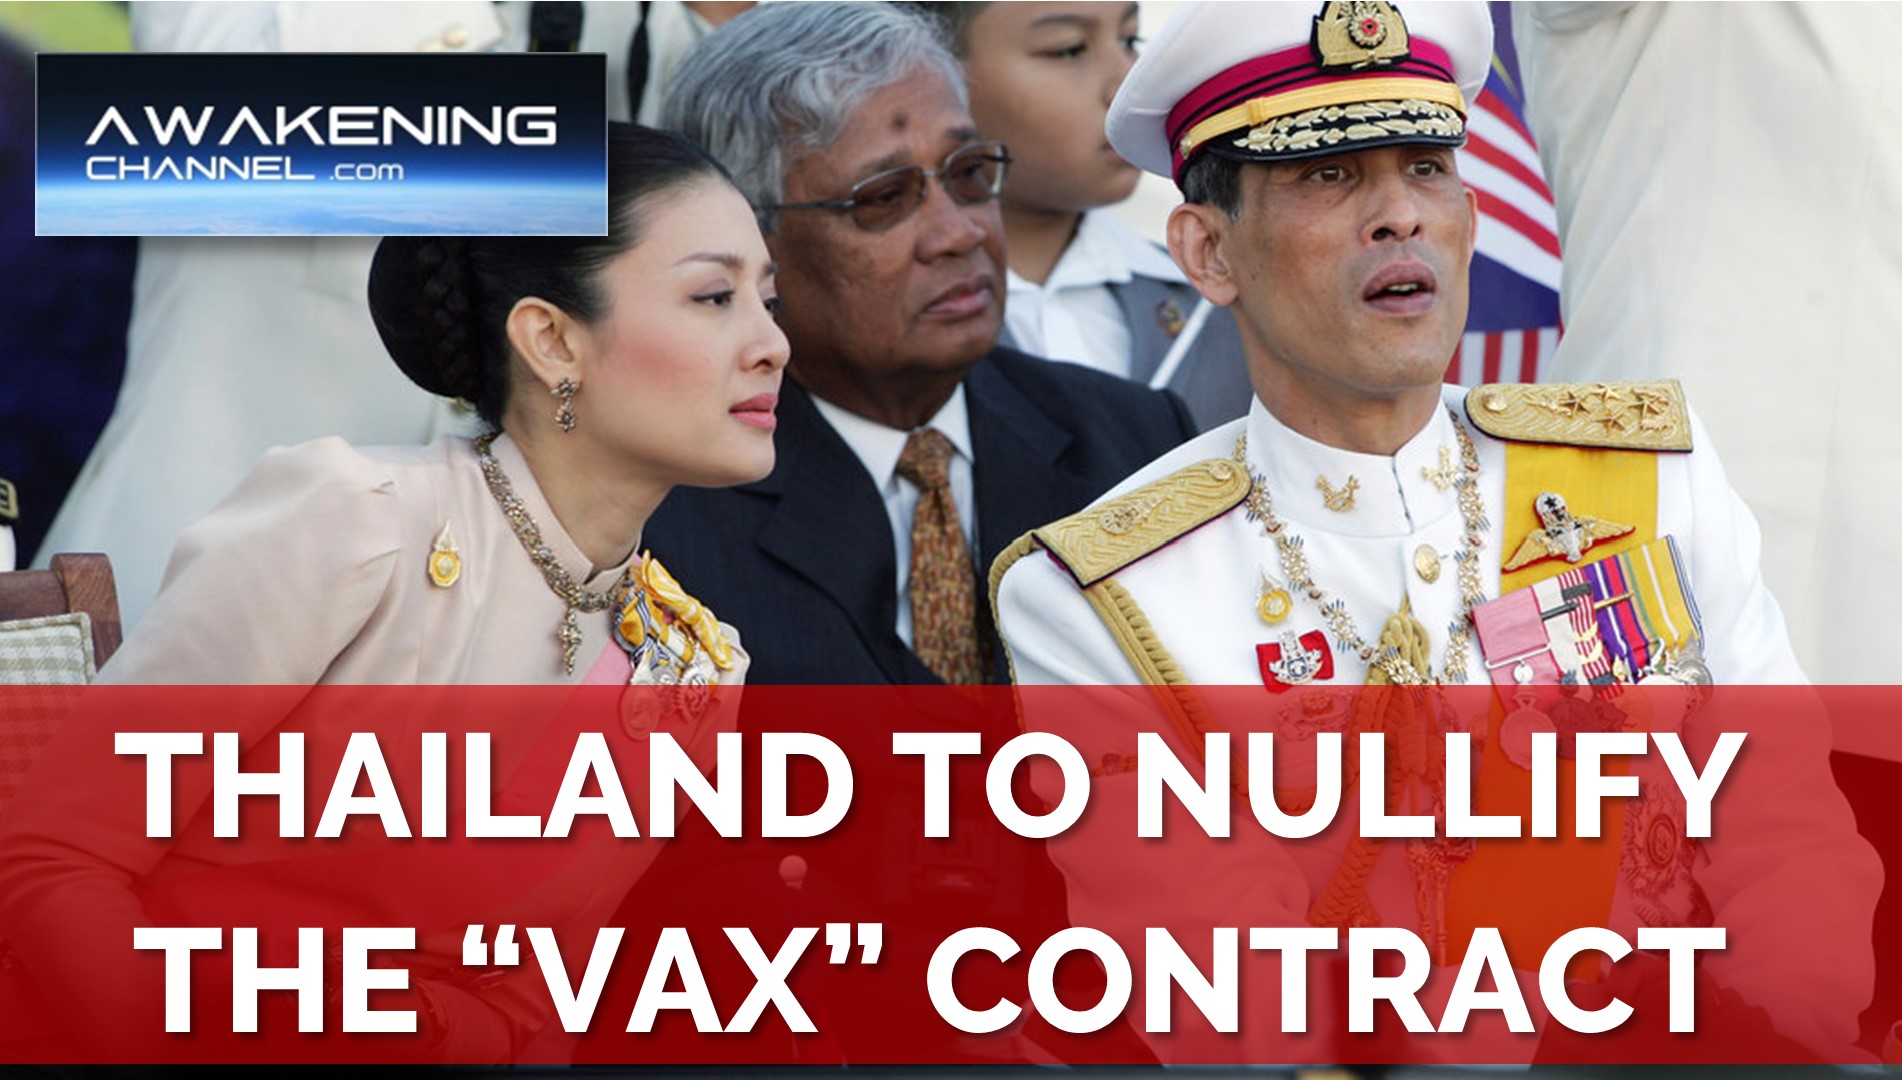 (´VAX´) Thailand To Nullify The “Vax” Contract